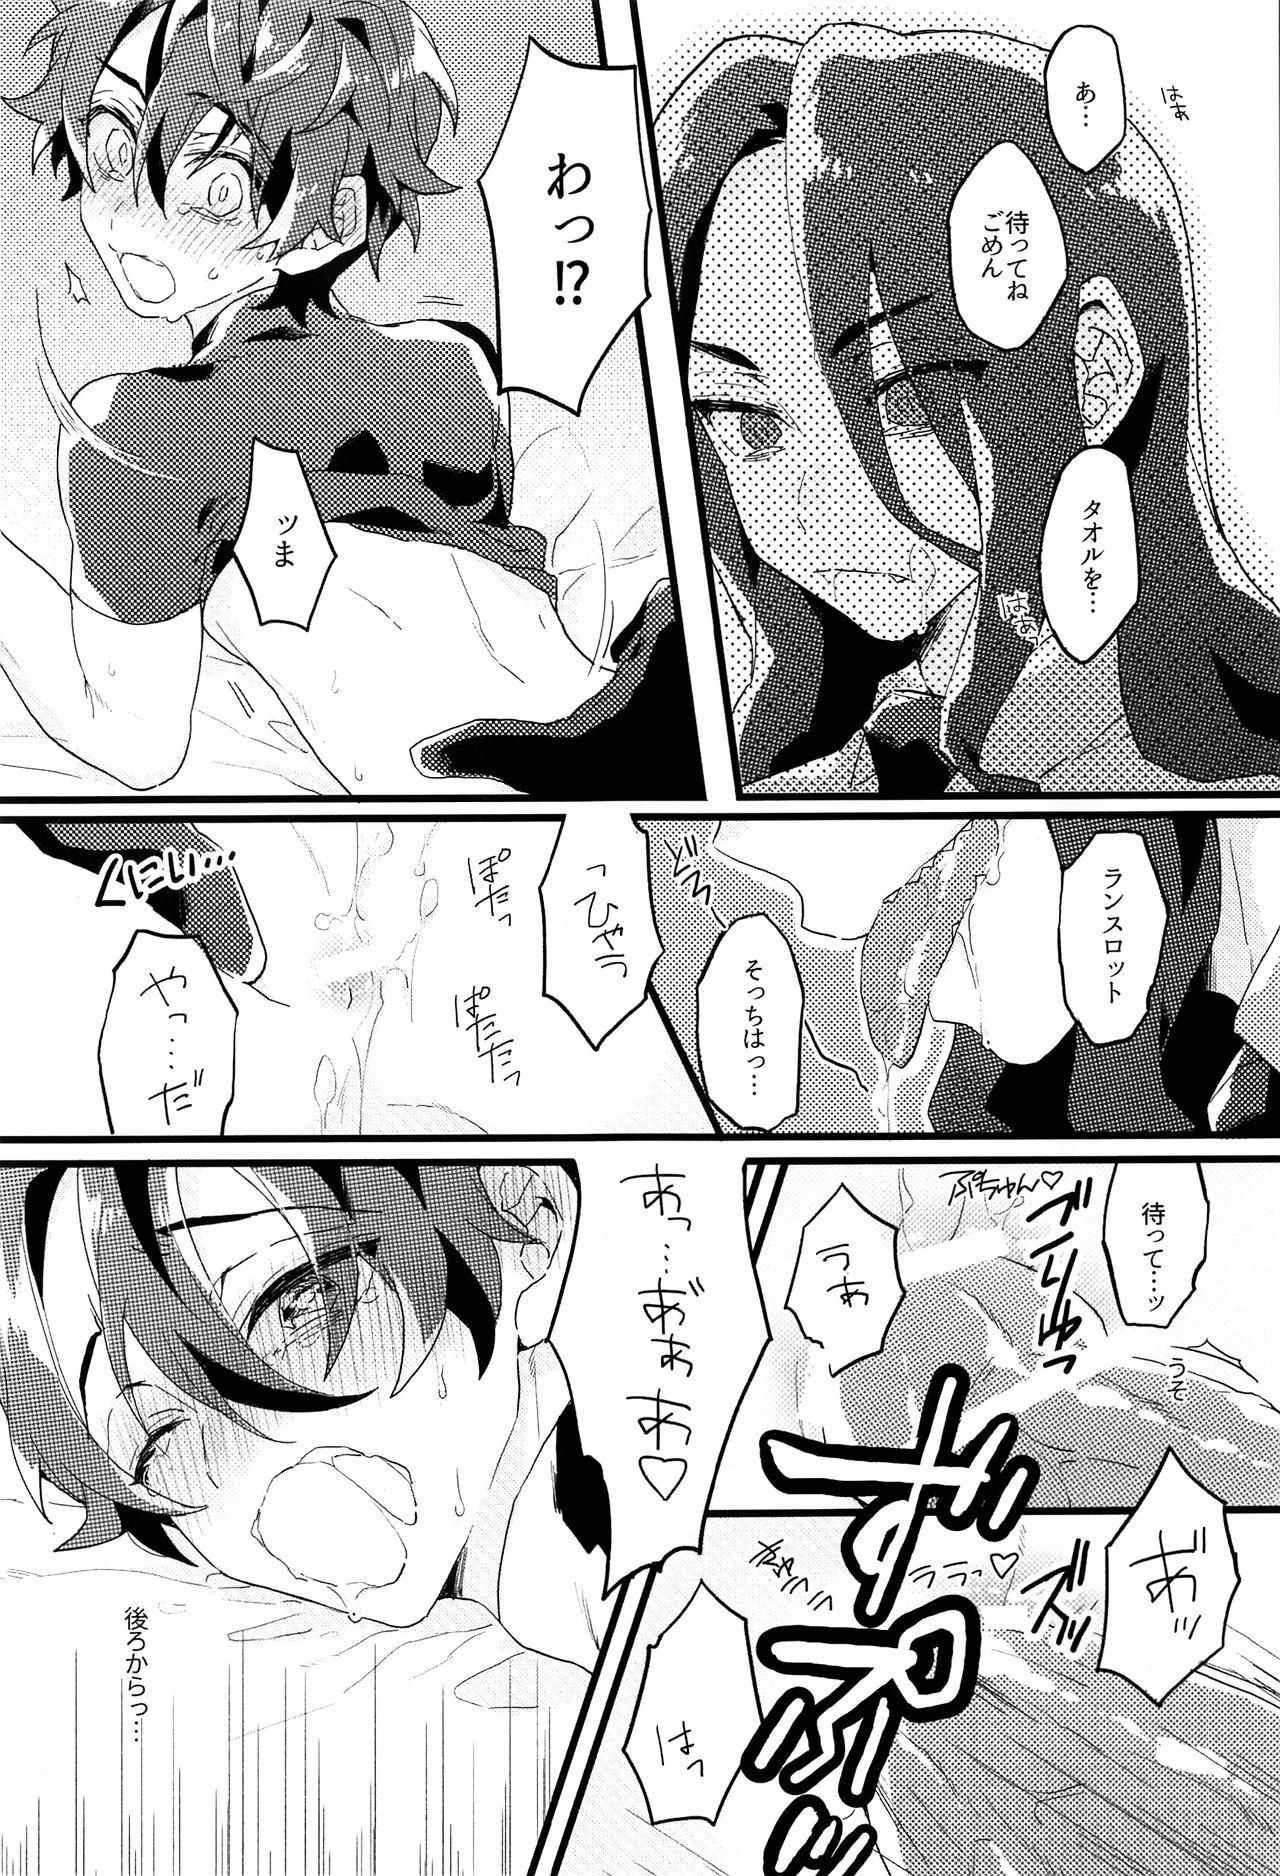 Bucetuda hungry sharp chune - Fate grand order Maid - Page 5